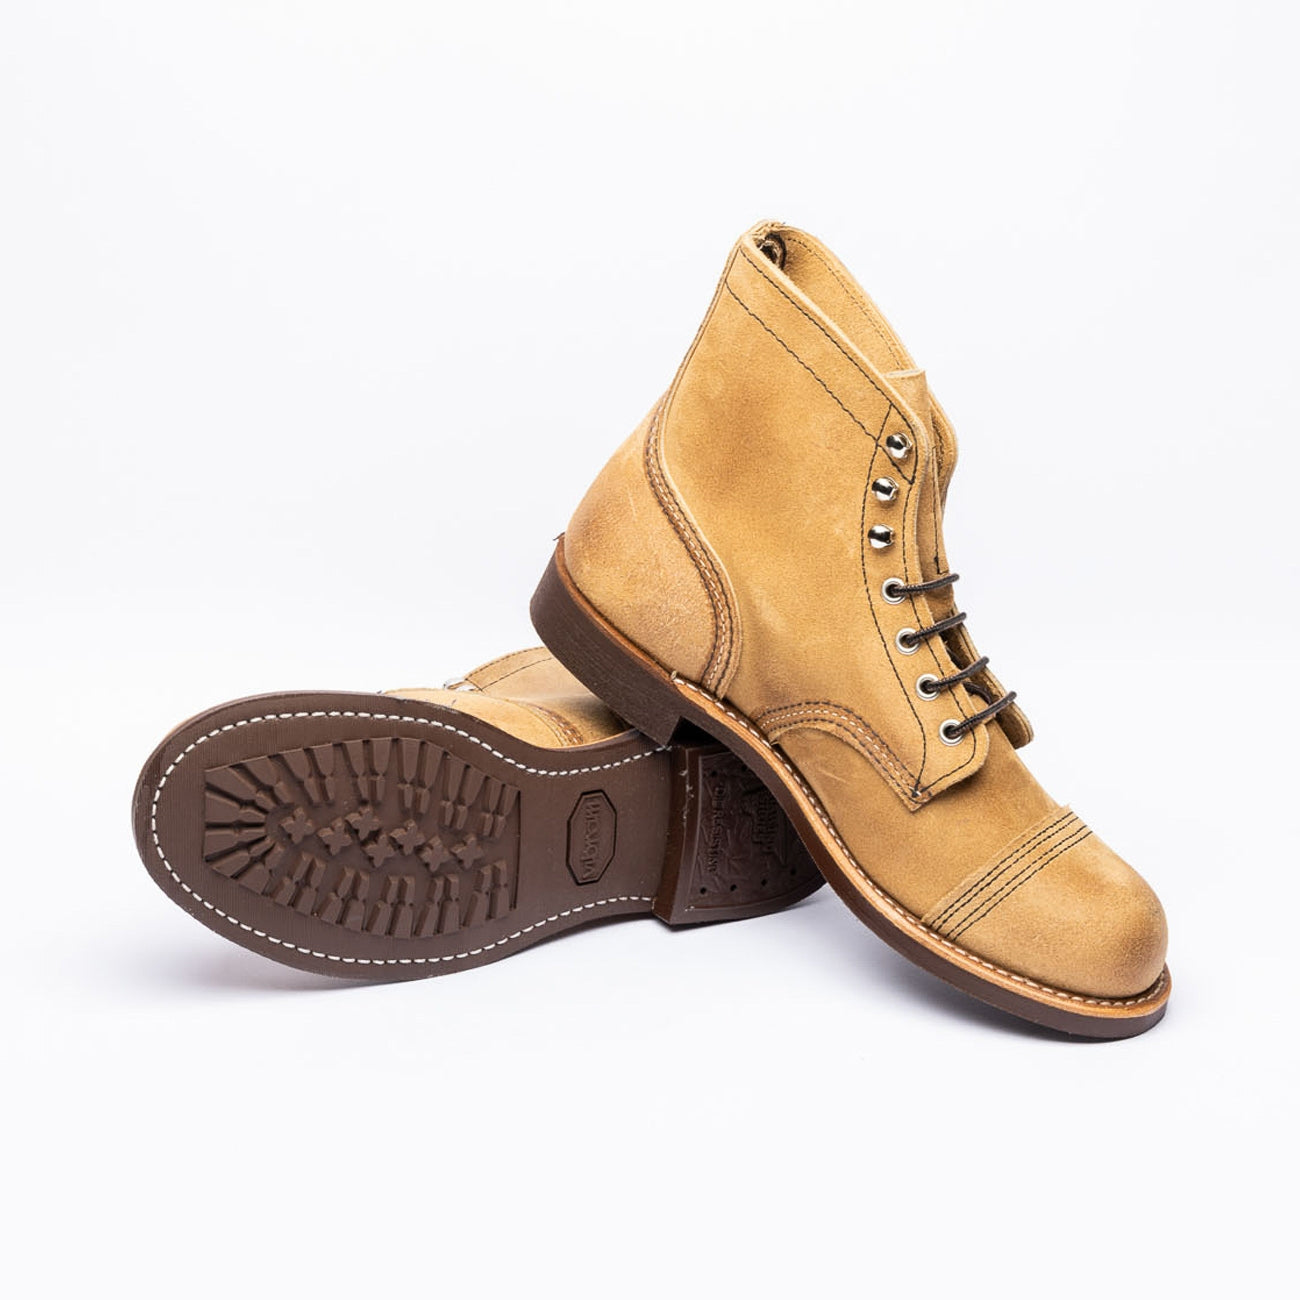 Polacco derby Red Wing Iron Ranger 8083 Hawthorne Mileskinner in camoscio sabbia